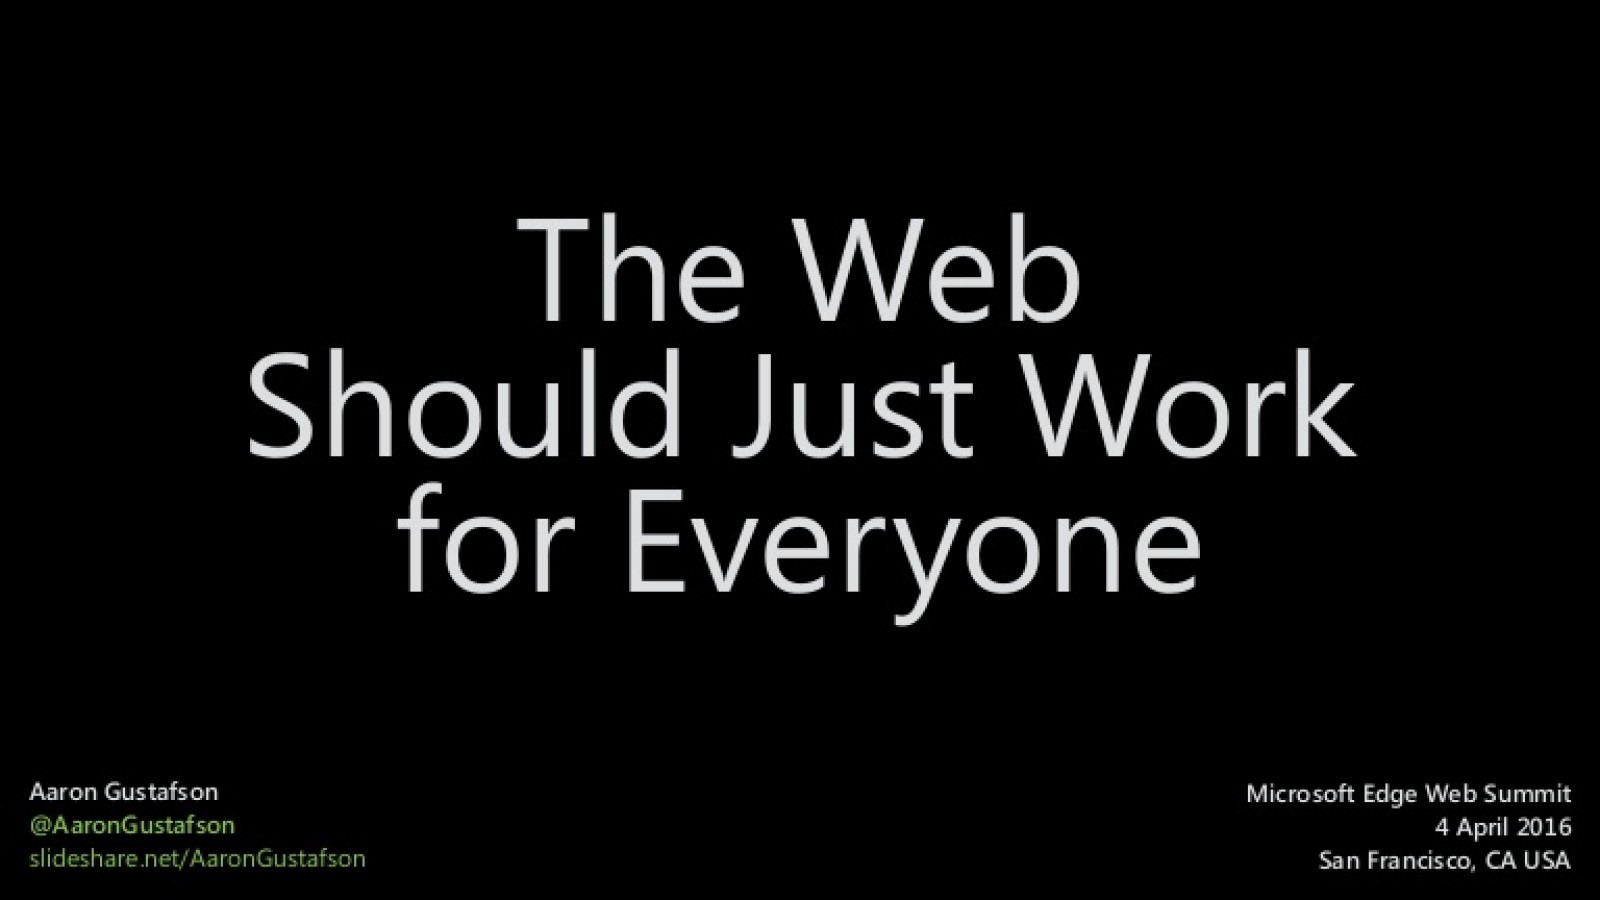 The Web Should Just Work for Everyone